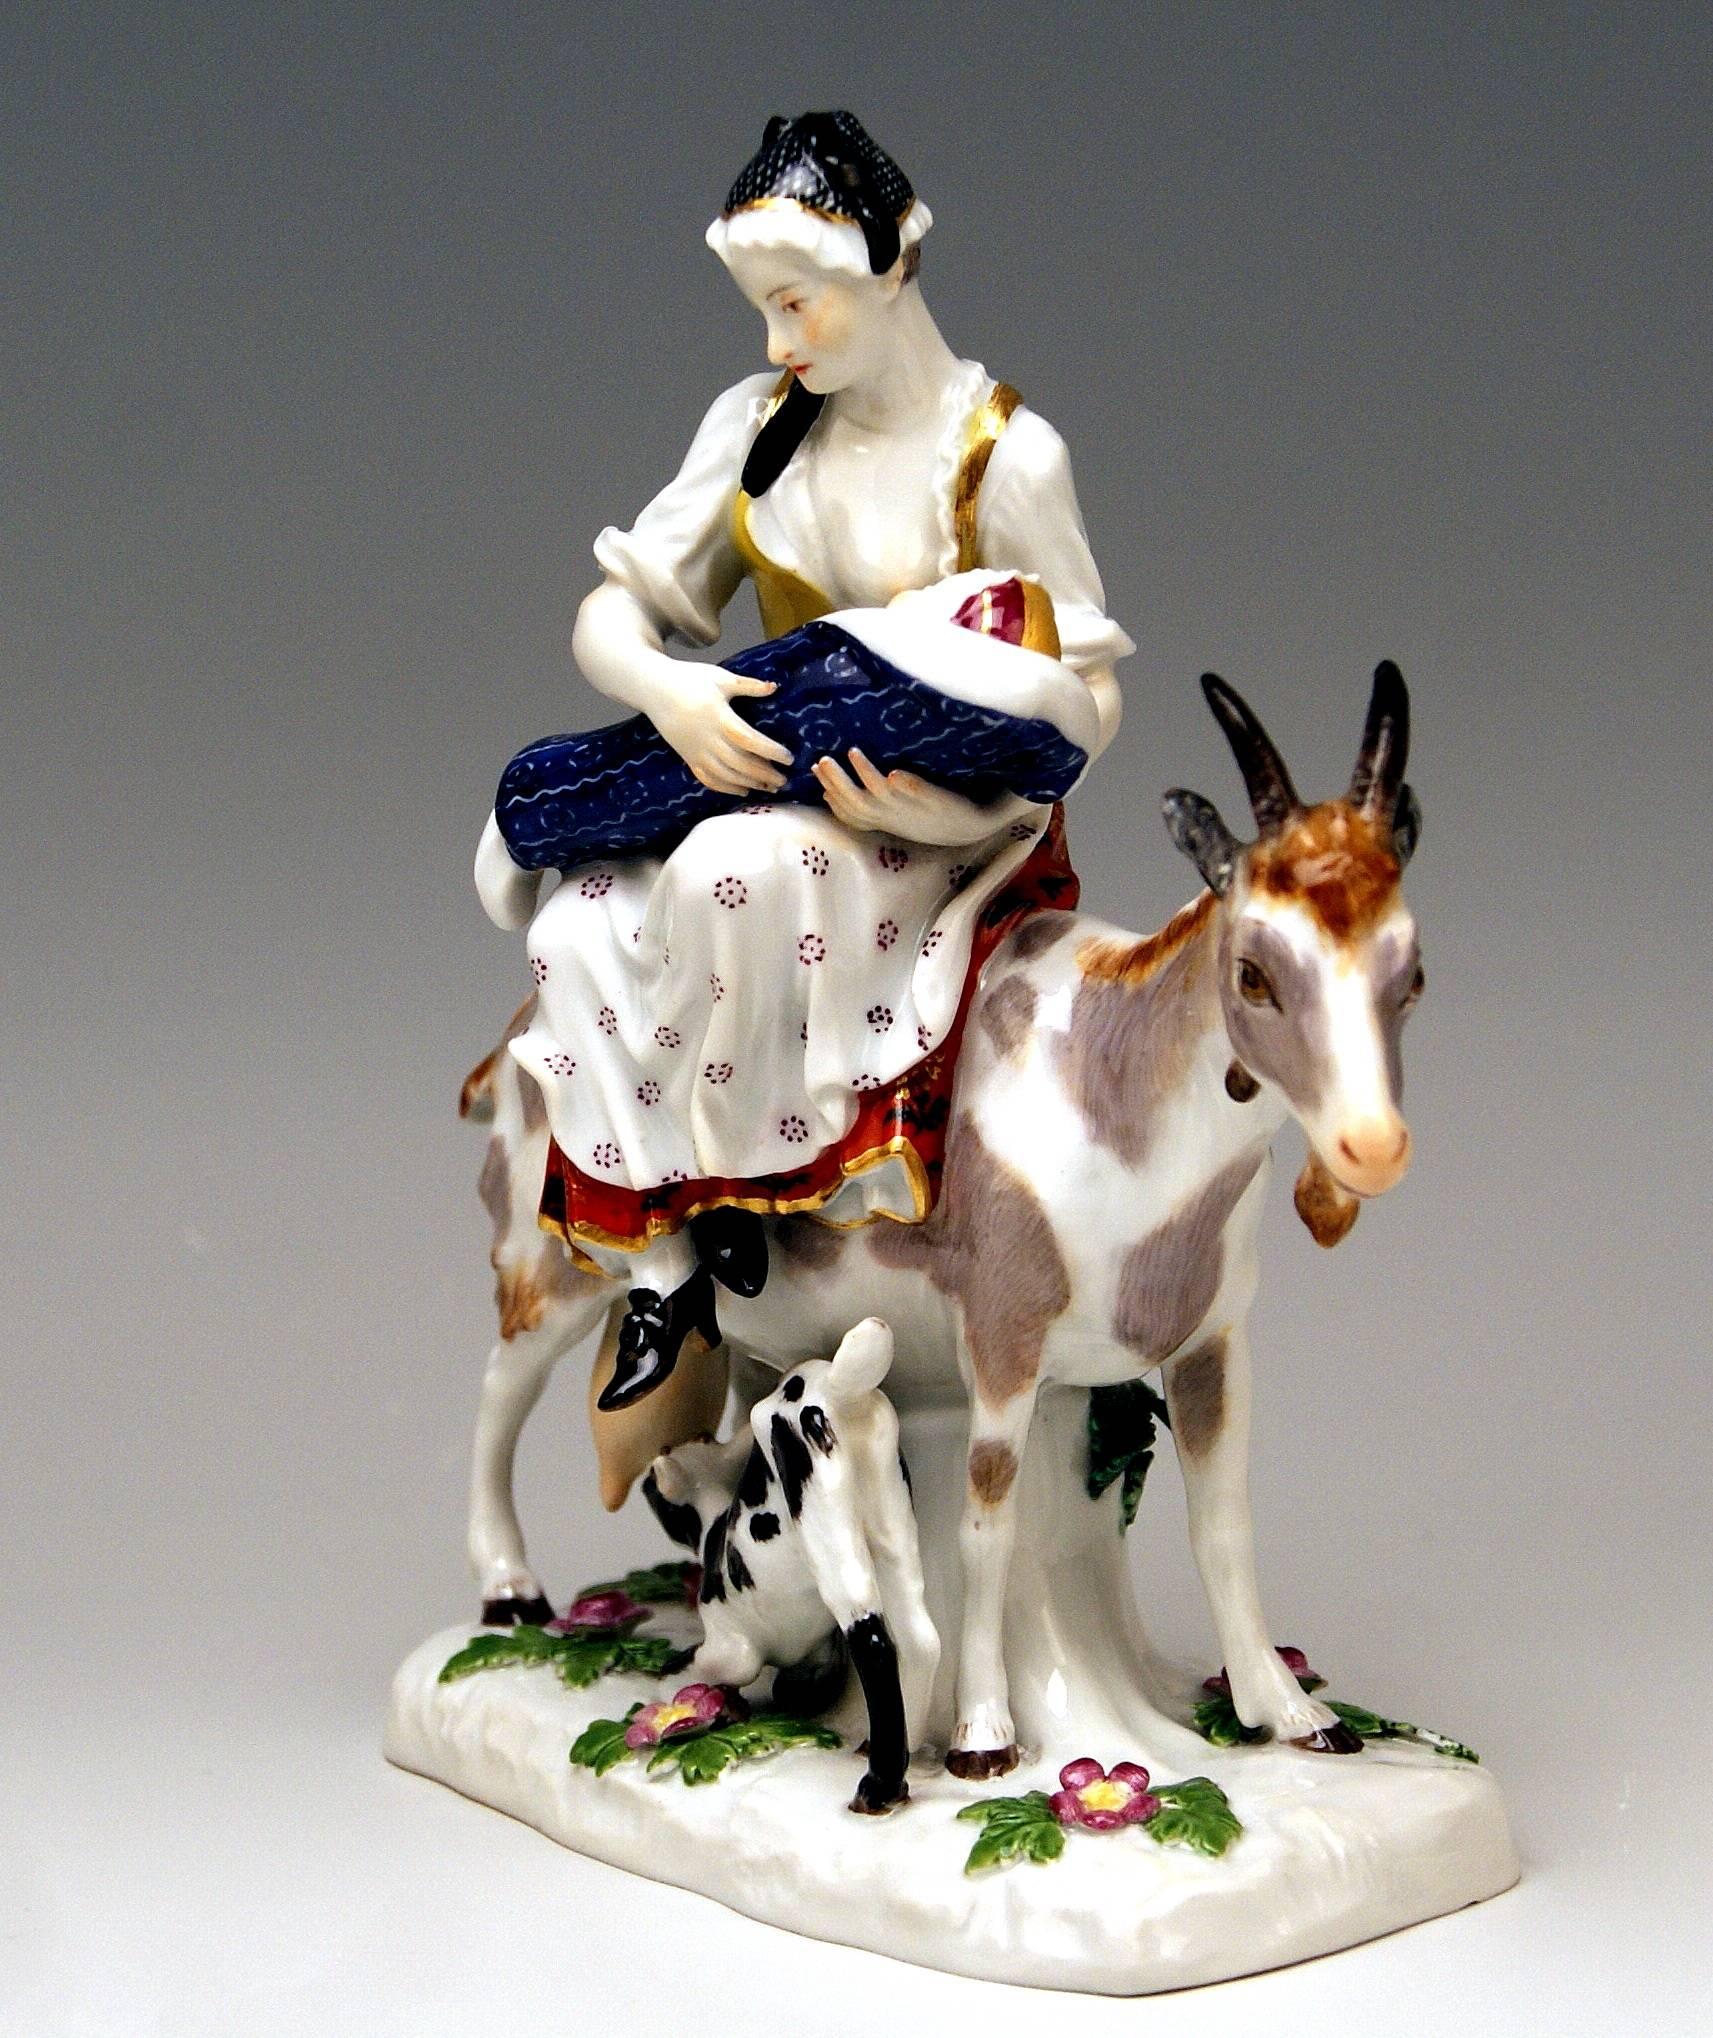 Meissen stunning item of very interesting appearance: Wife of tailor riding on goat
Model 155

Measures:
Height 7.28 inches (18.5 cm)
Width 6.29 inches (16.0 cm)
Depth 2.75 inches (7.0 cm)

Manufactory: Meissen
Hallmarked: Blue Meissen